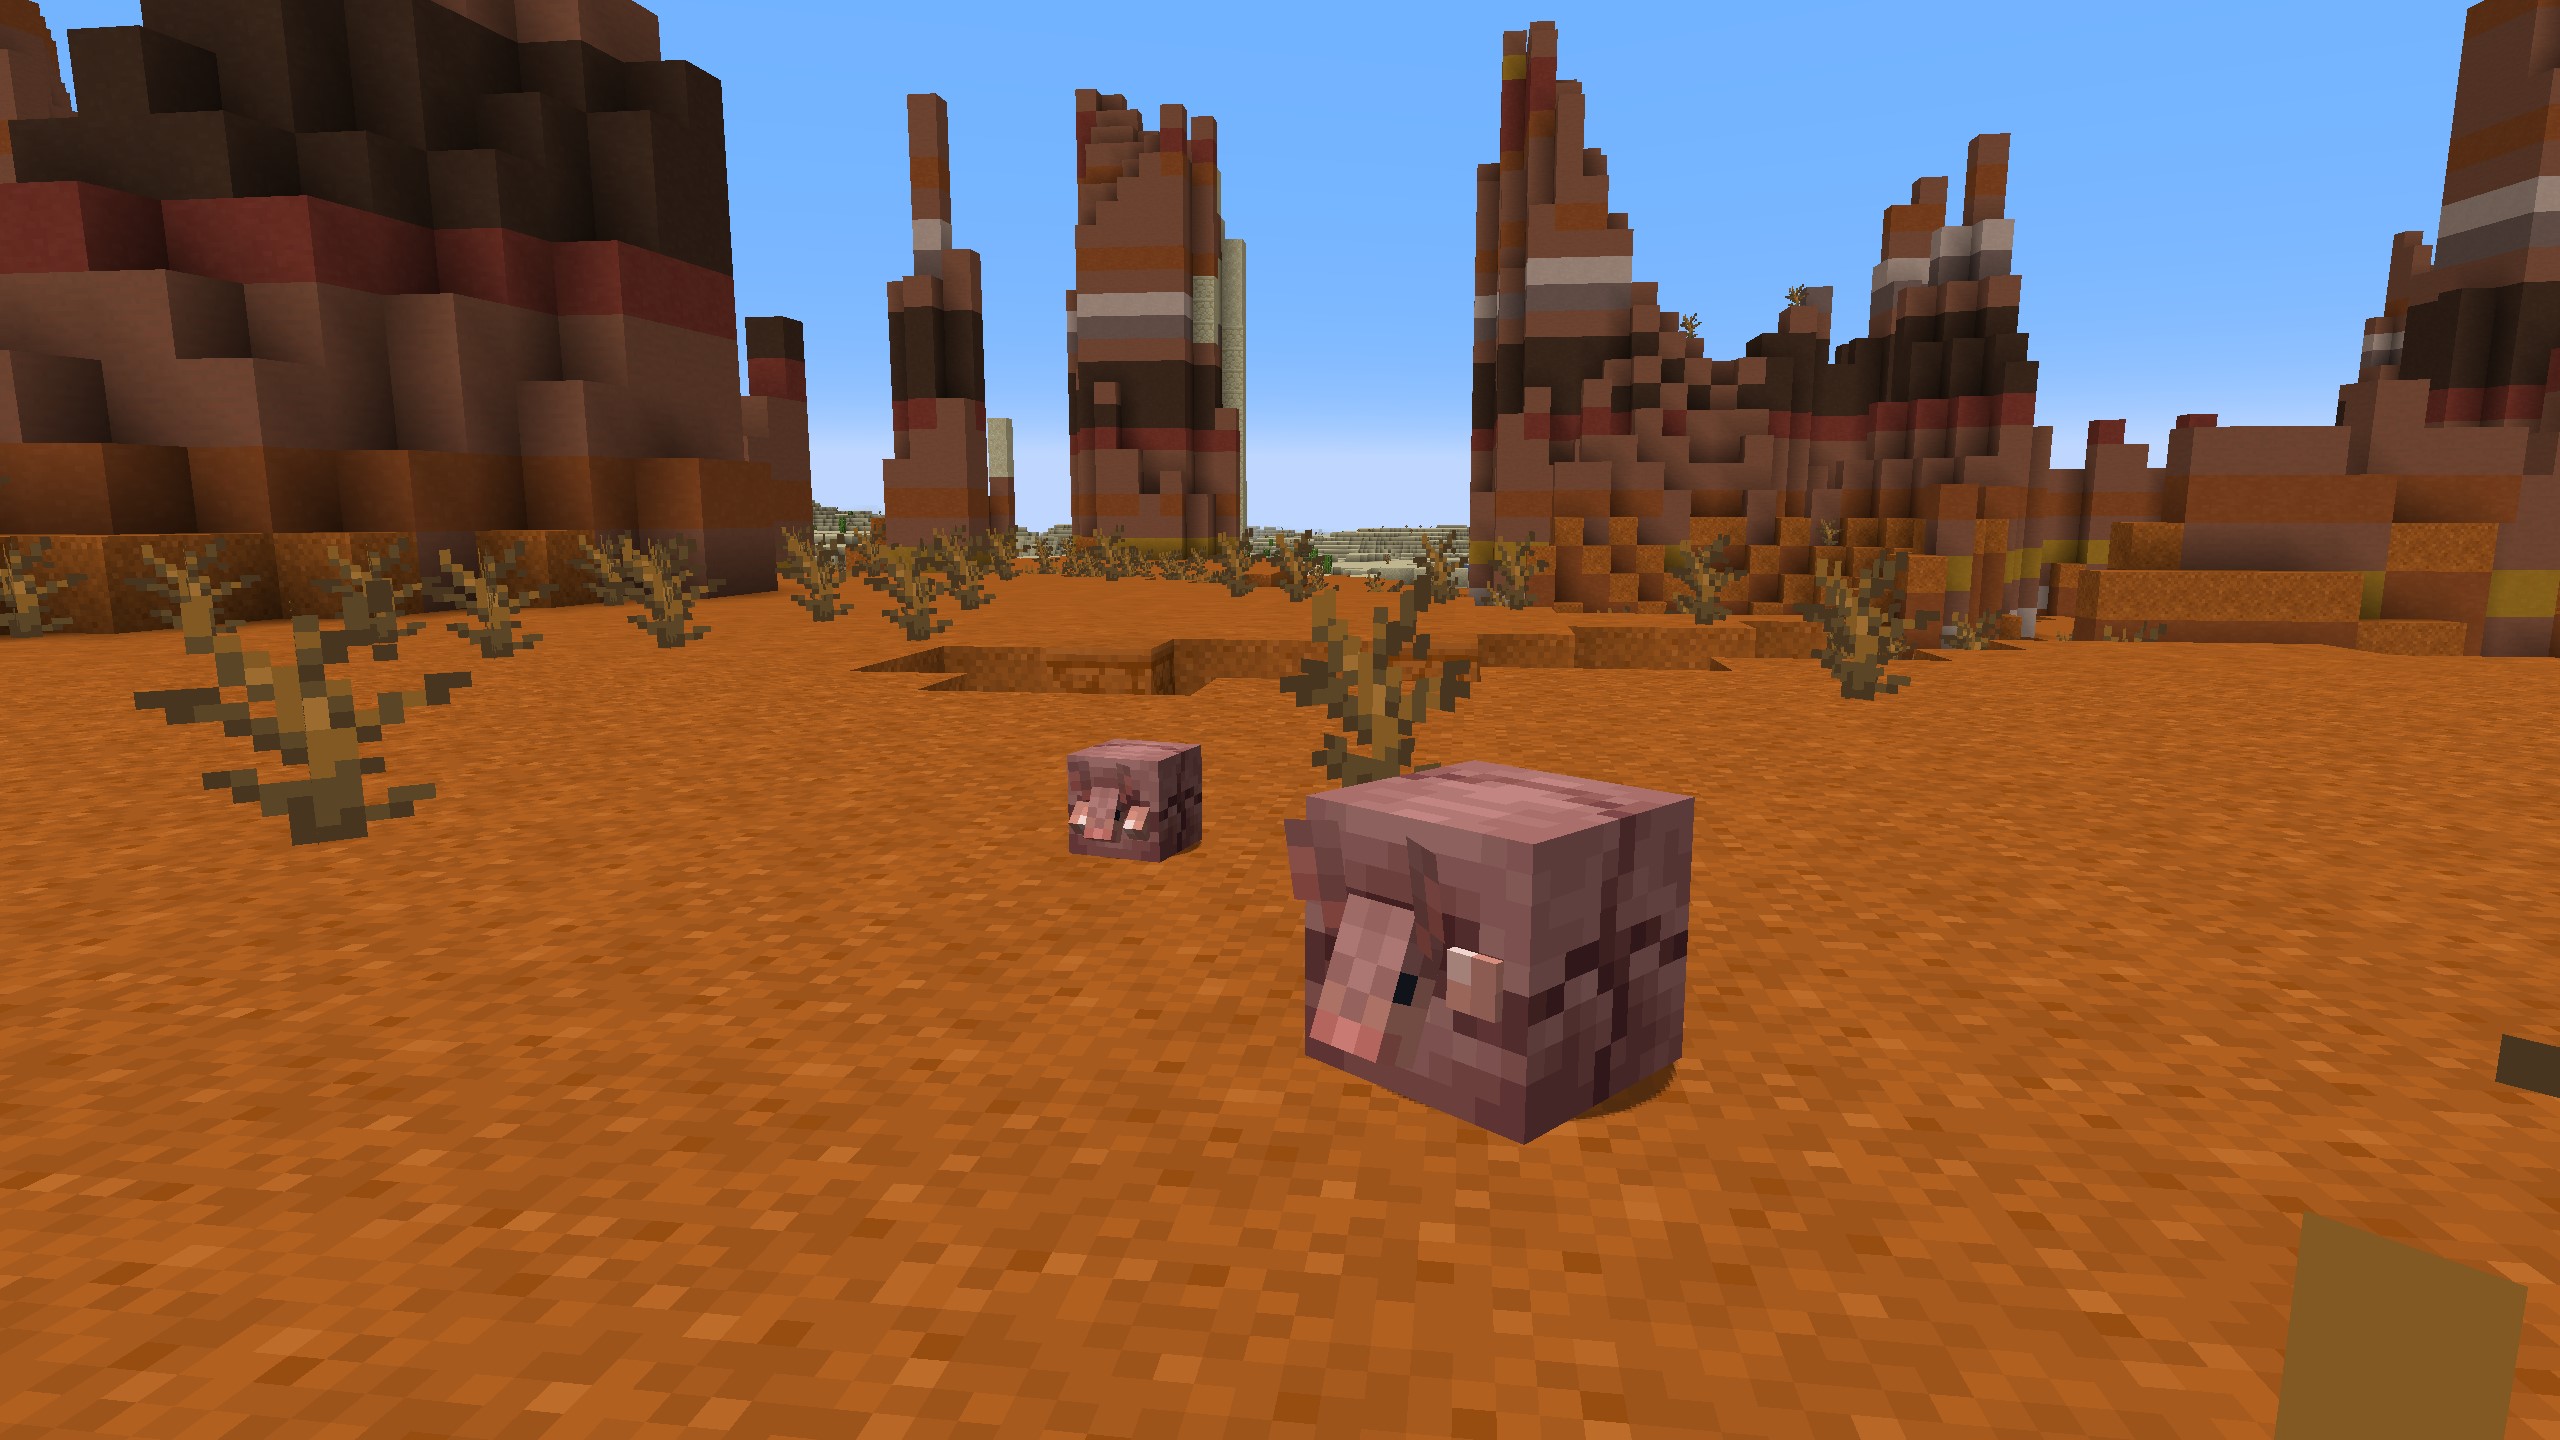 Minecraft - two armadillos rolled into balls peek their faces out to check for danger